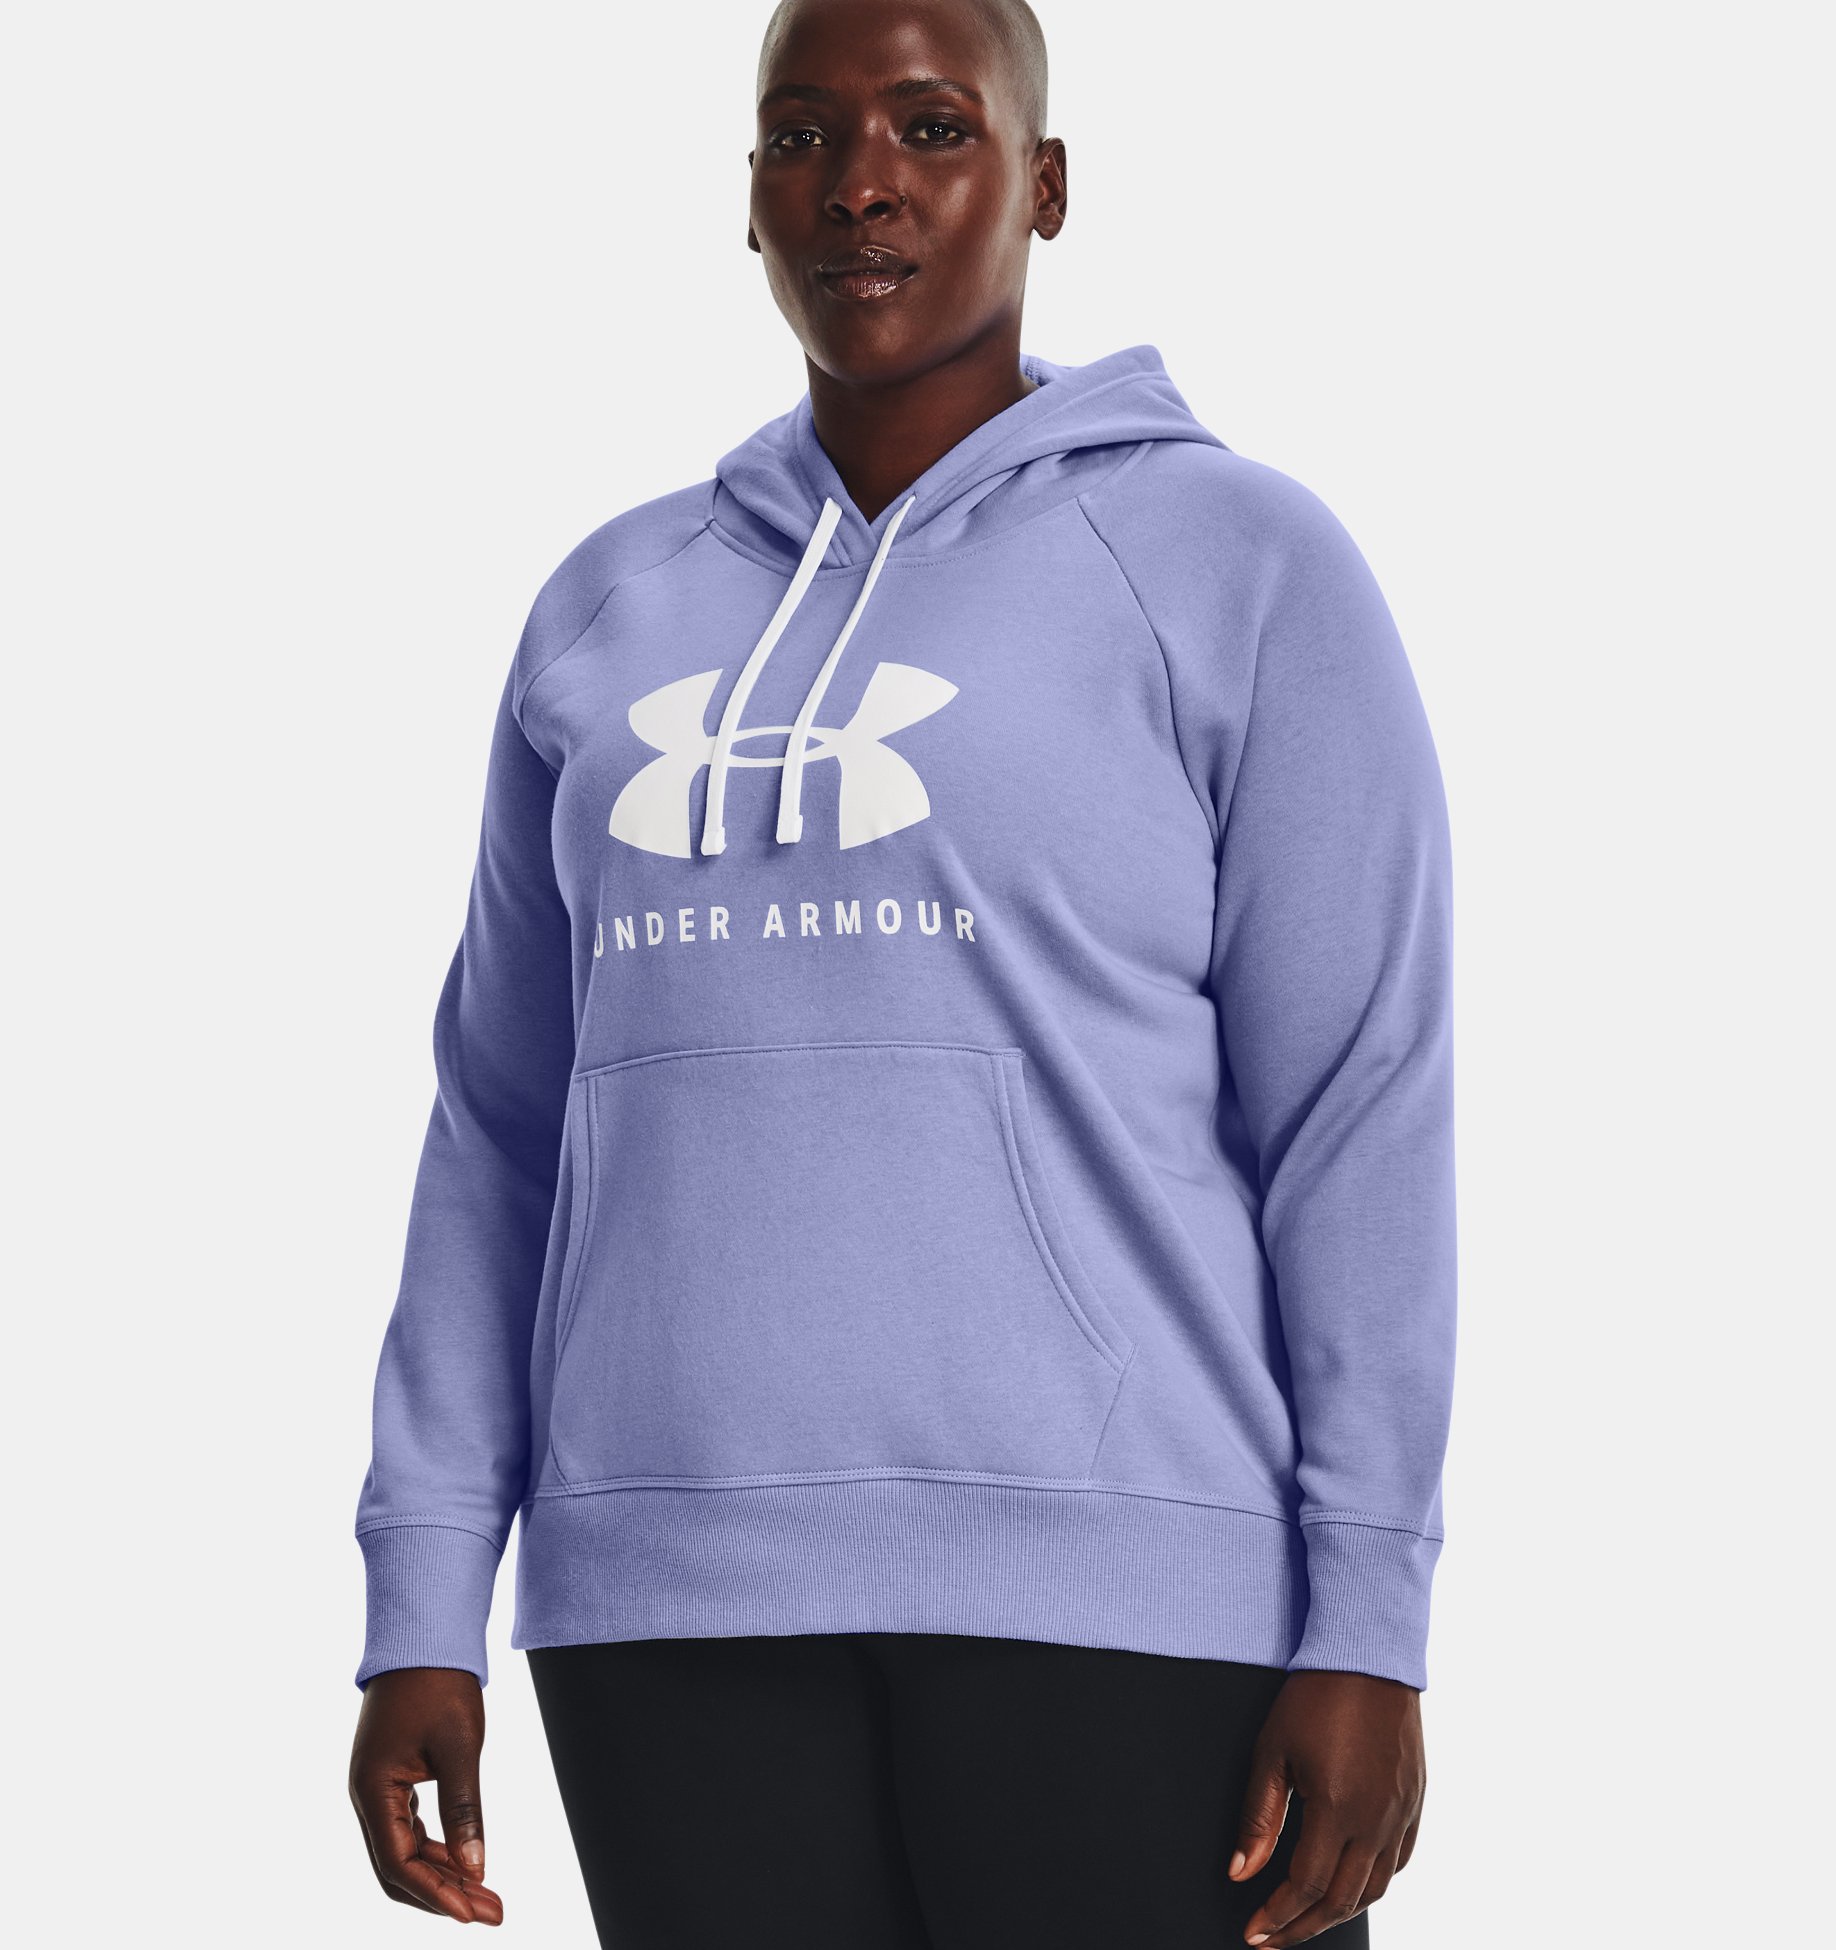 Under Armour Fleece Sale: an Extra 40% off on Select Styles